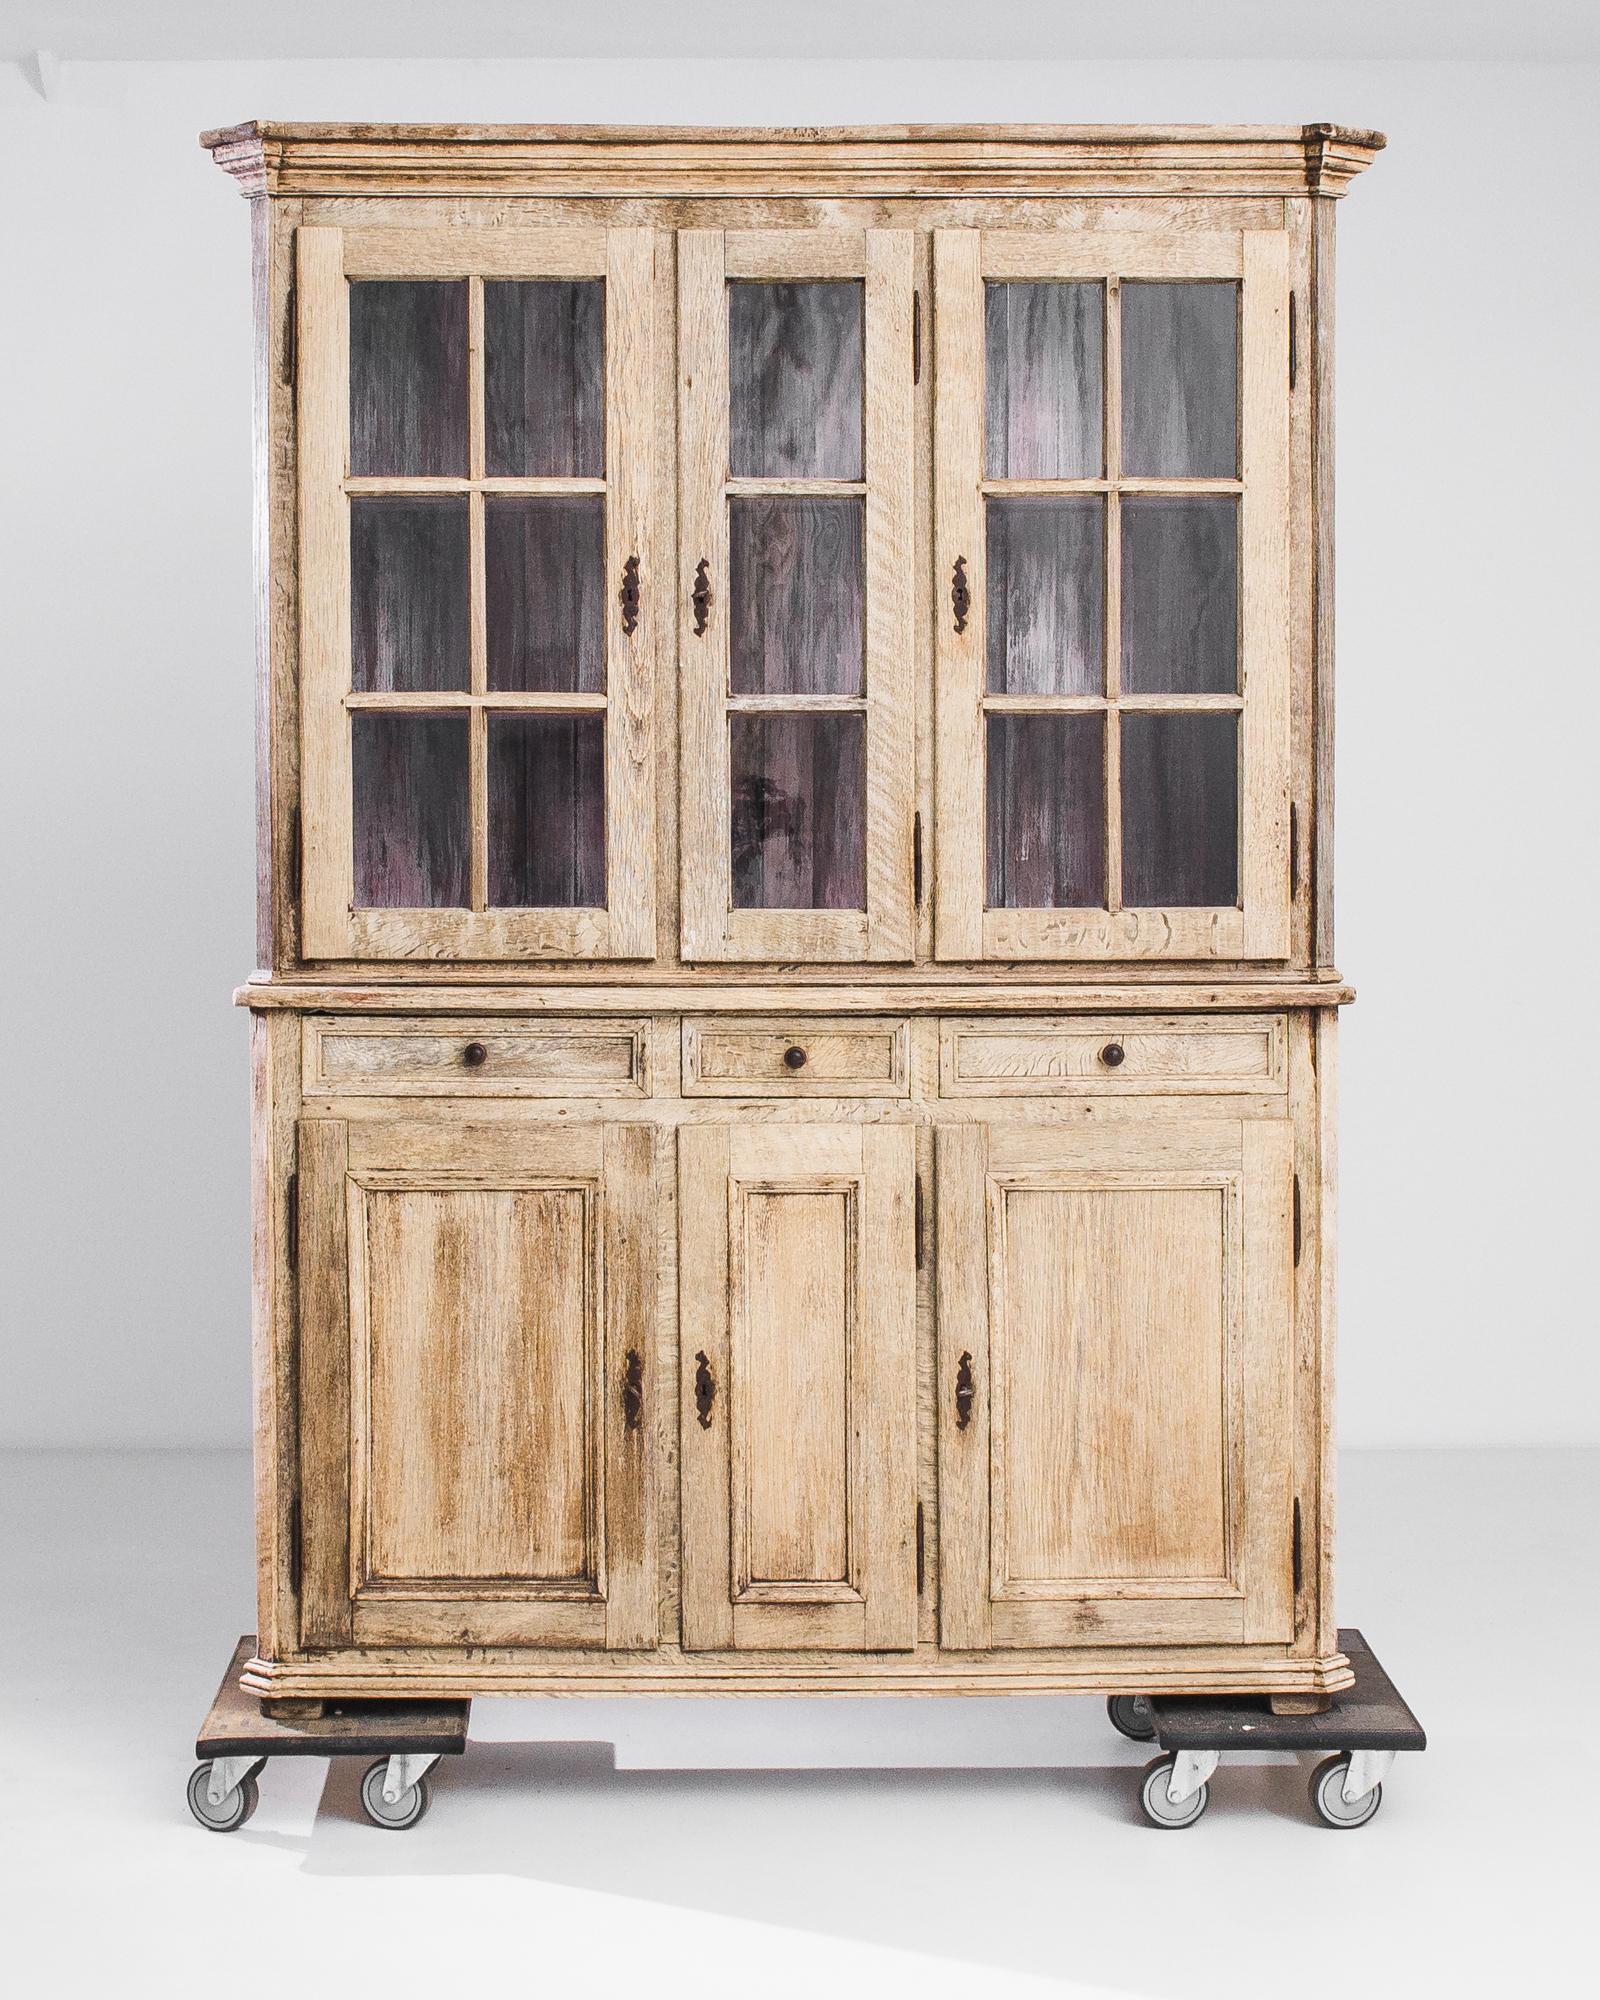 Natural oak and an enigmatic interior patina give this antique vitrine an enticing personality. Made in France in the 1880s, the cabinet has a country aesthetic, with mullioned window panes and paneled cupboards. The pale barley and burnt caramel